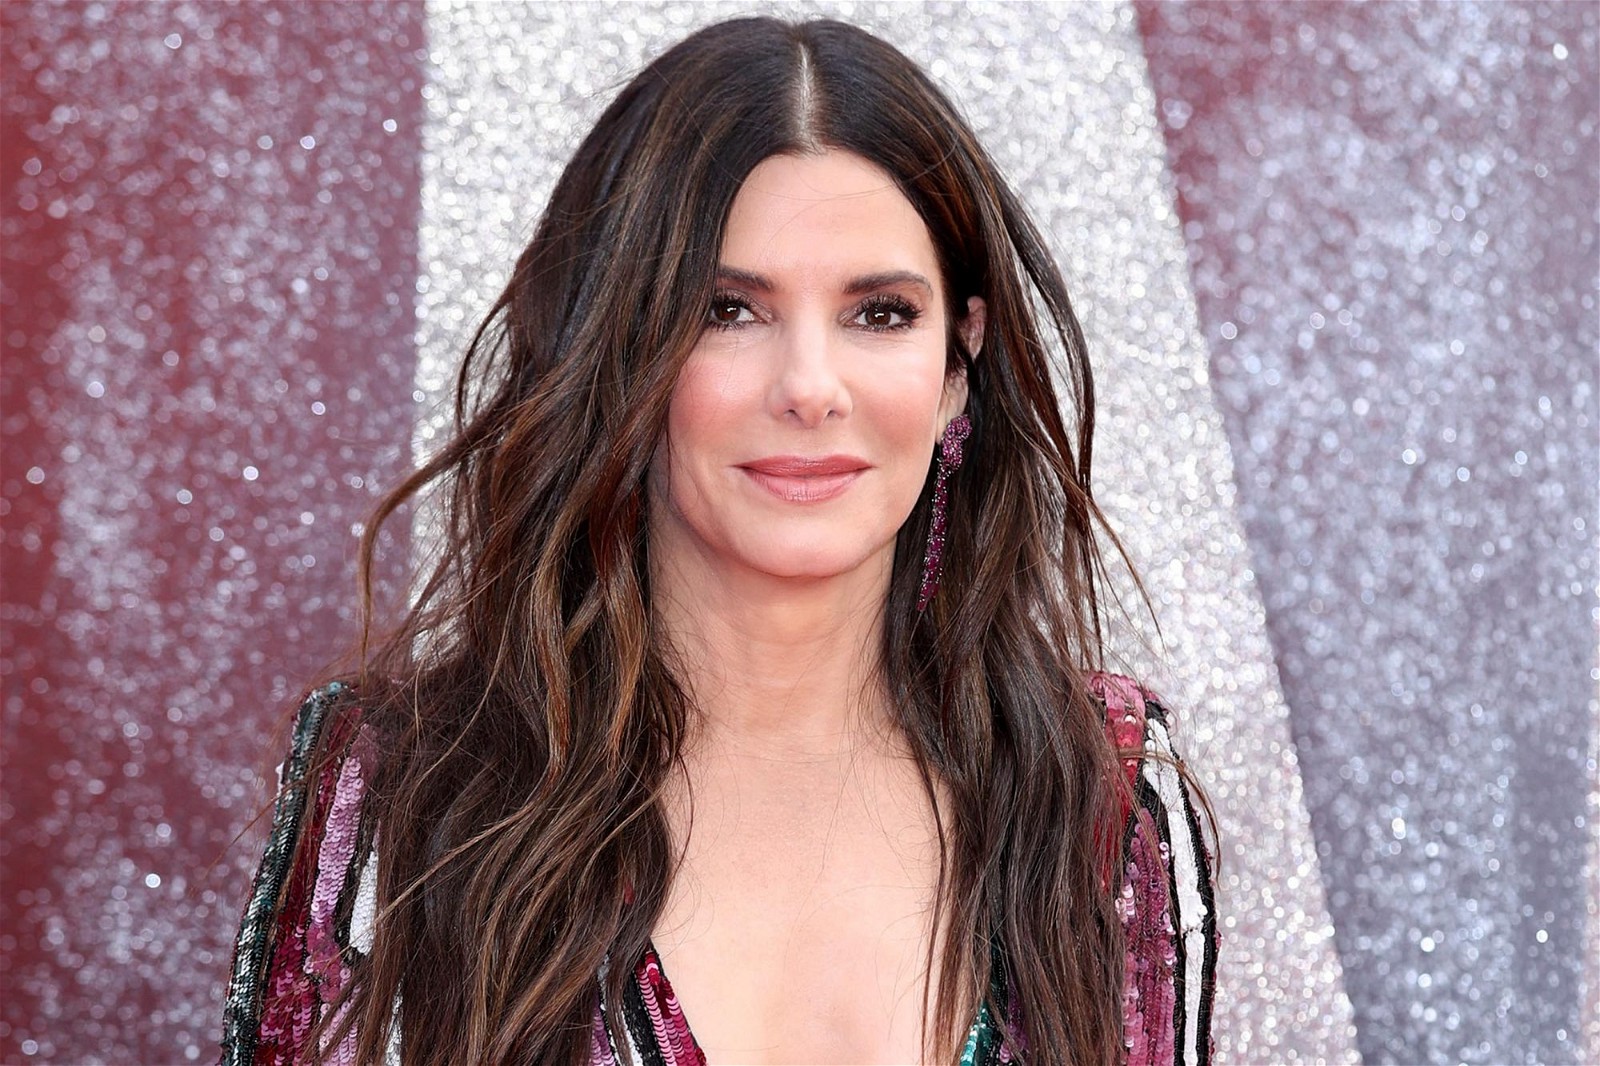 The movie that makes Sandra Bullock want to apologise